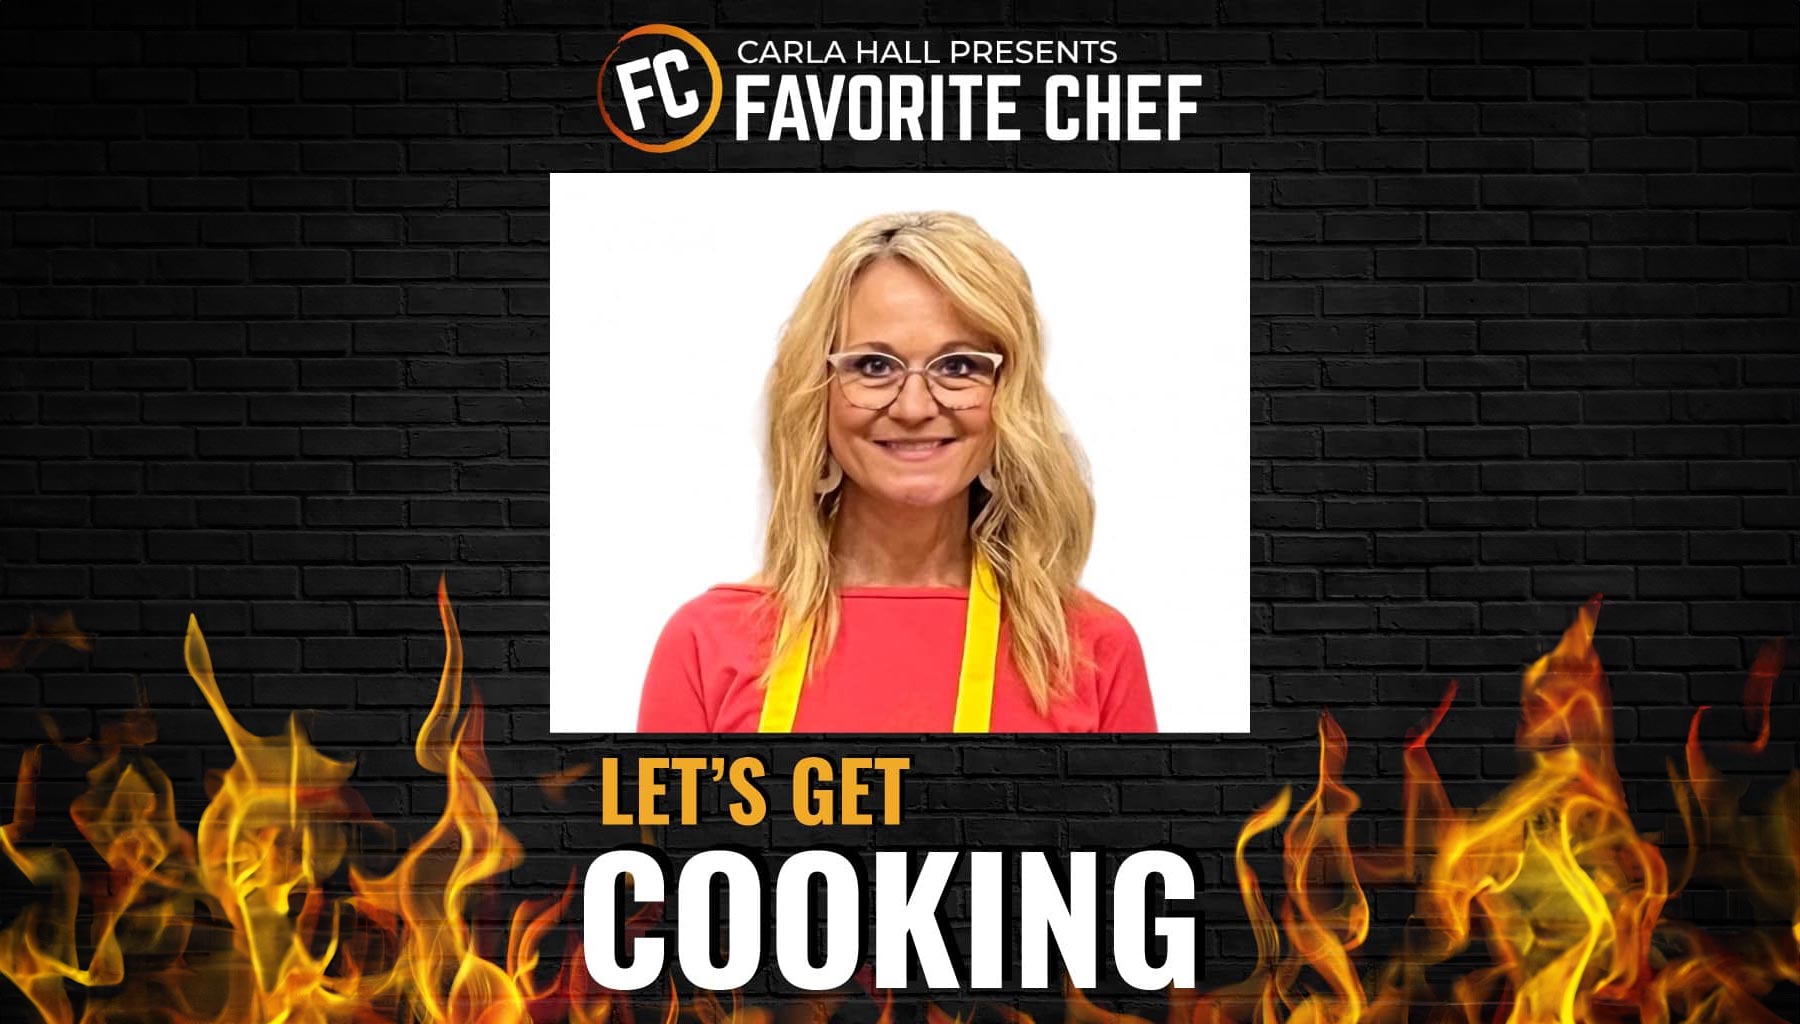 Type ready "Carla Hall Presents 'Favorite Chef' with portrait of a woman and more text that reads "Let's Get Cooking"